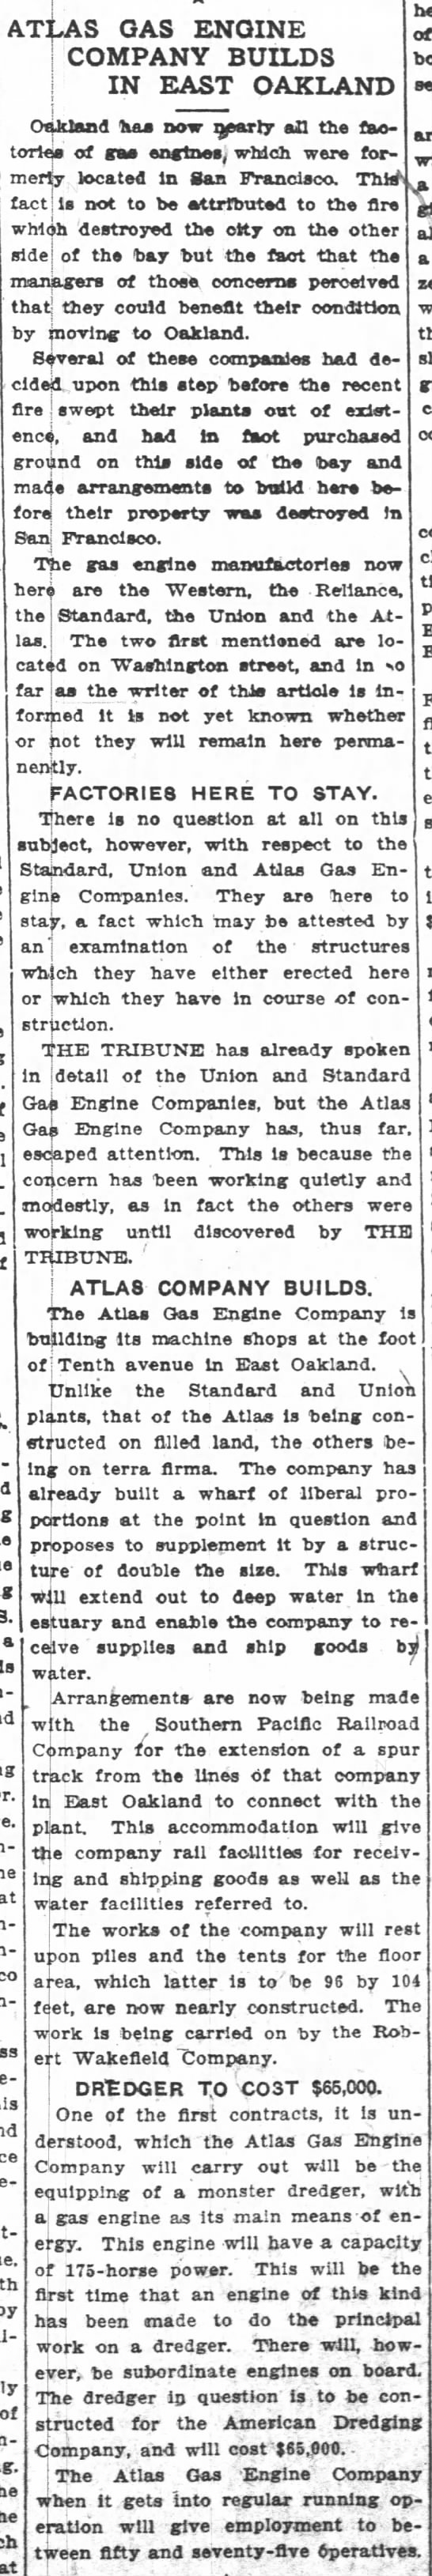 Atlas Gas Engine Company Builds in East Oakland - 